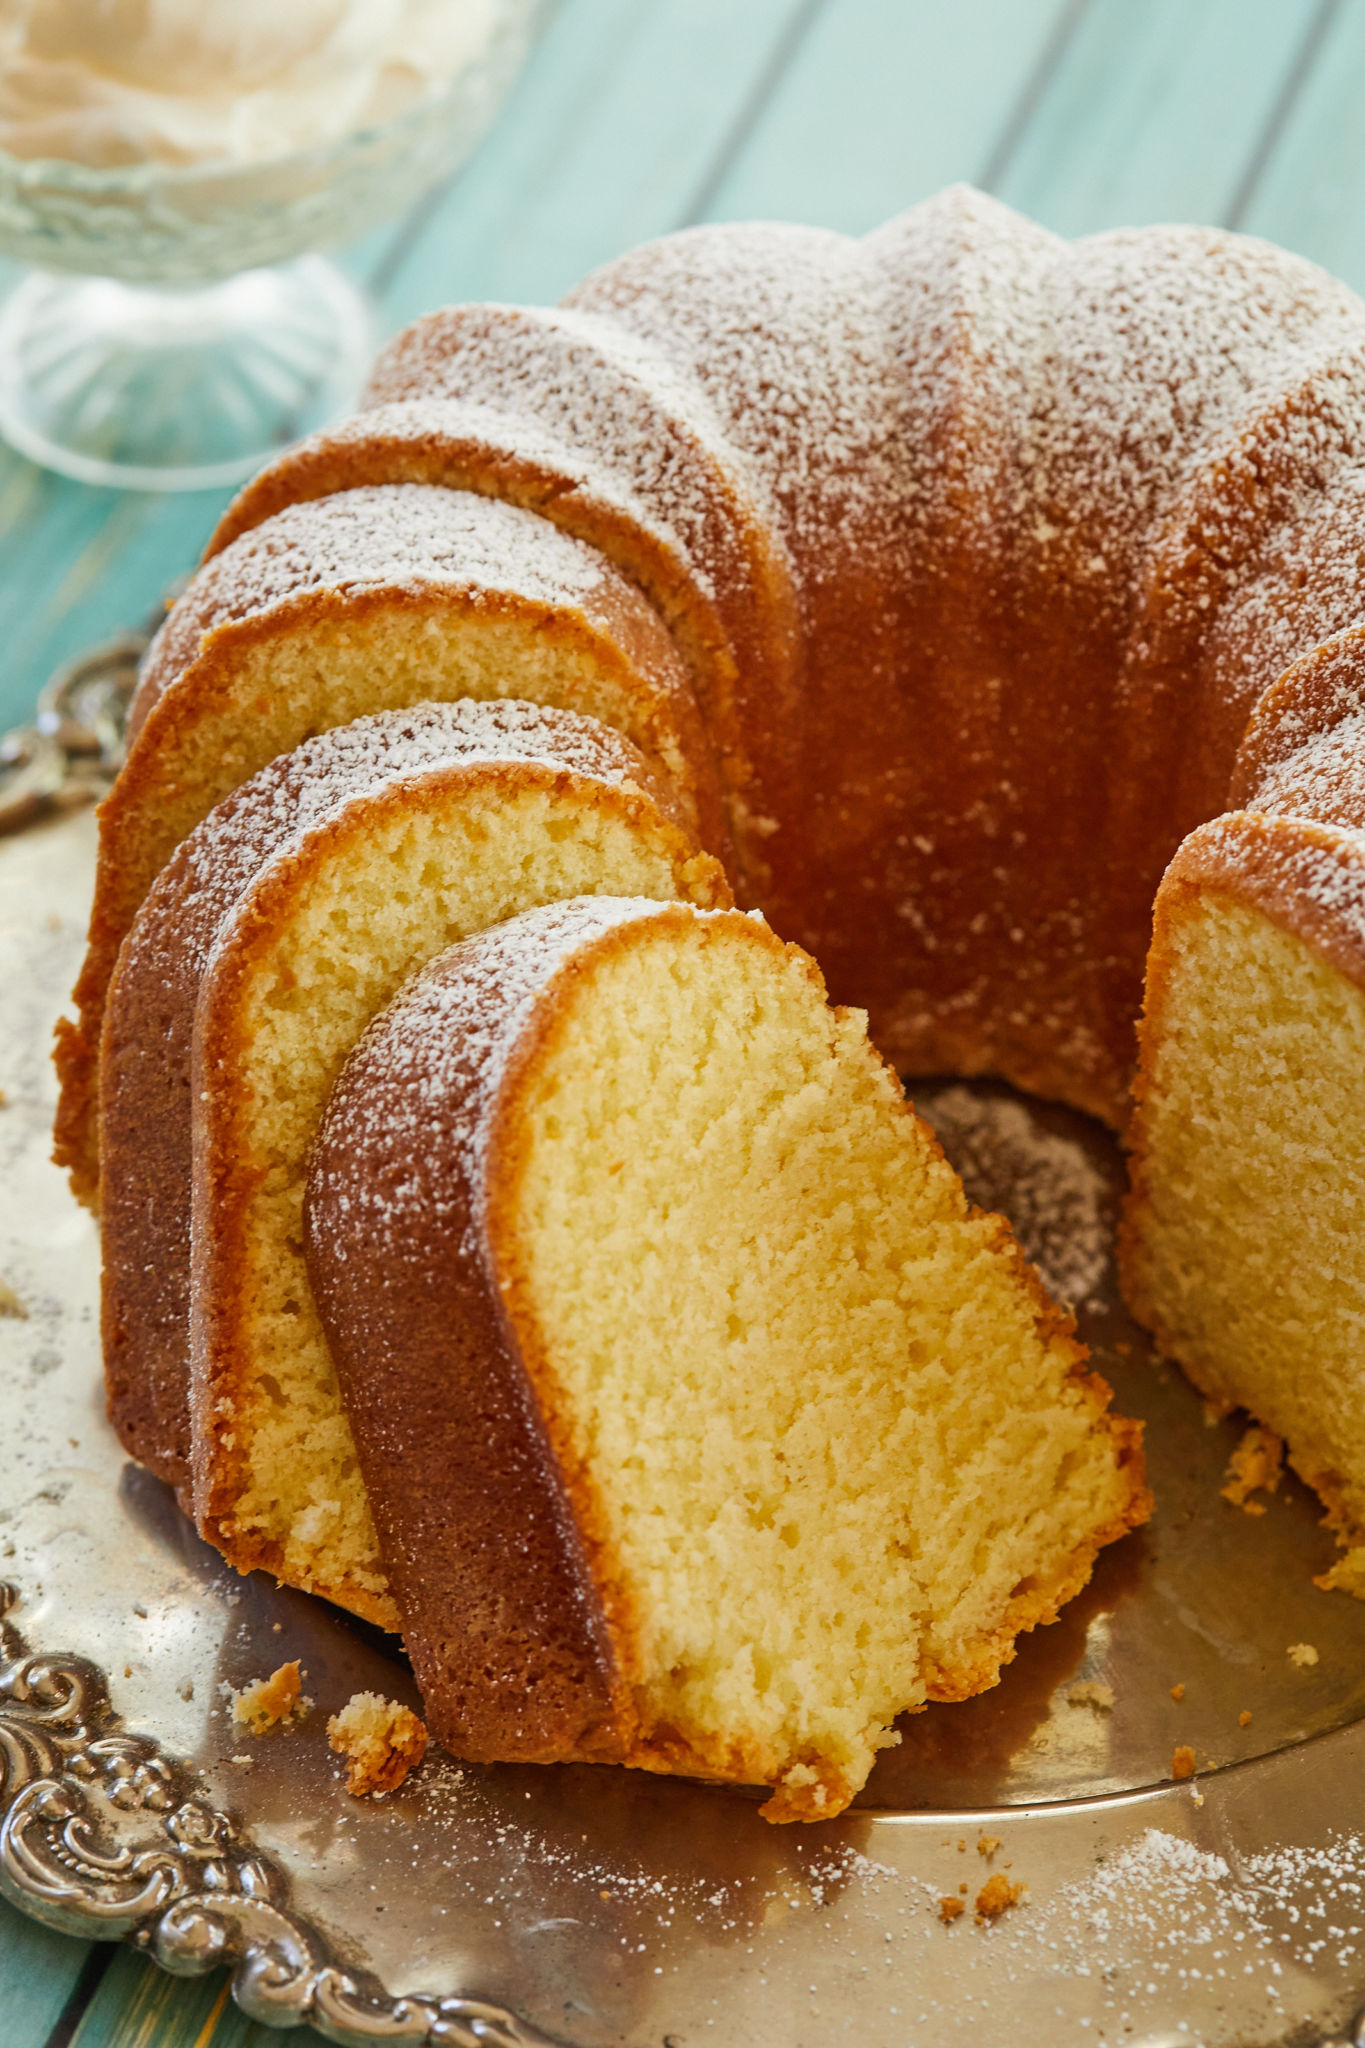 A slice of sour cream pound cake to show texture and consistency.